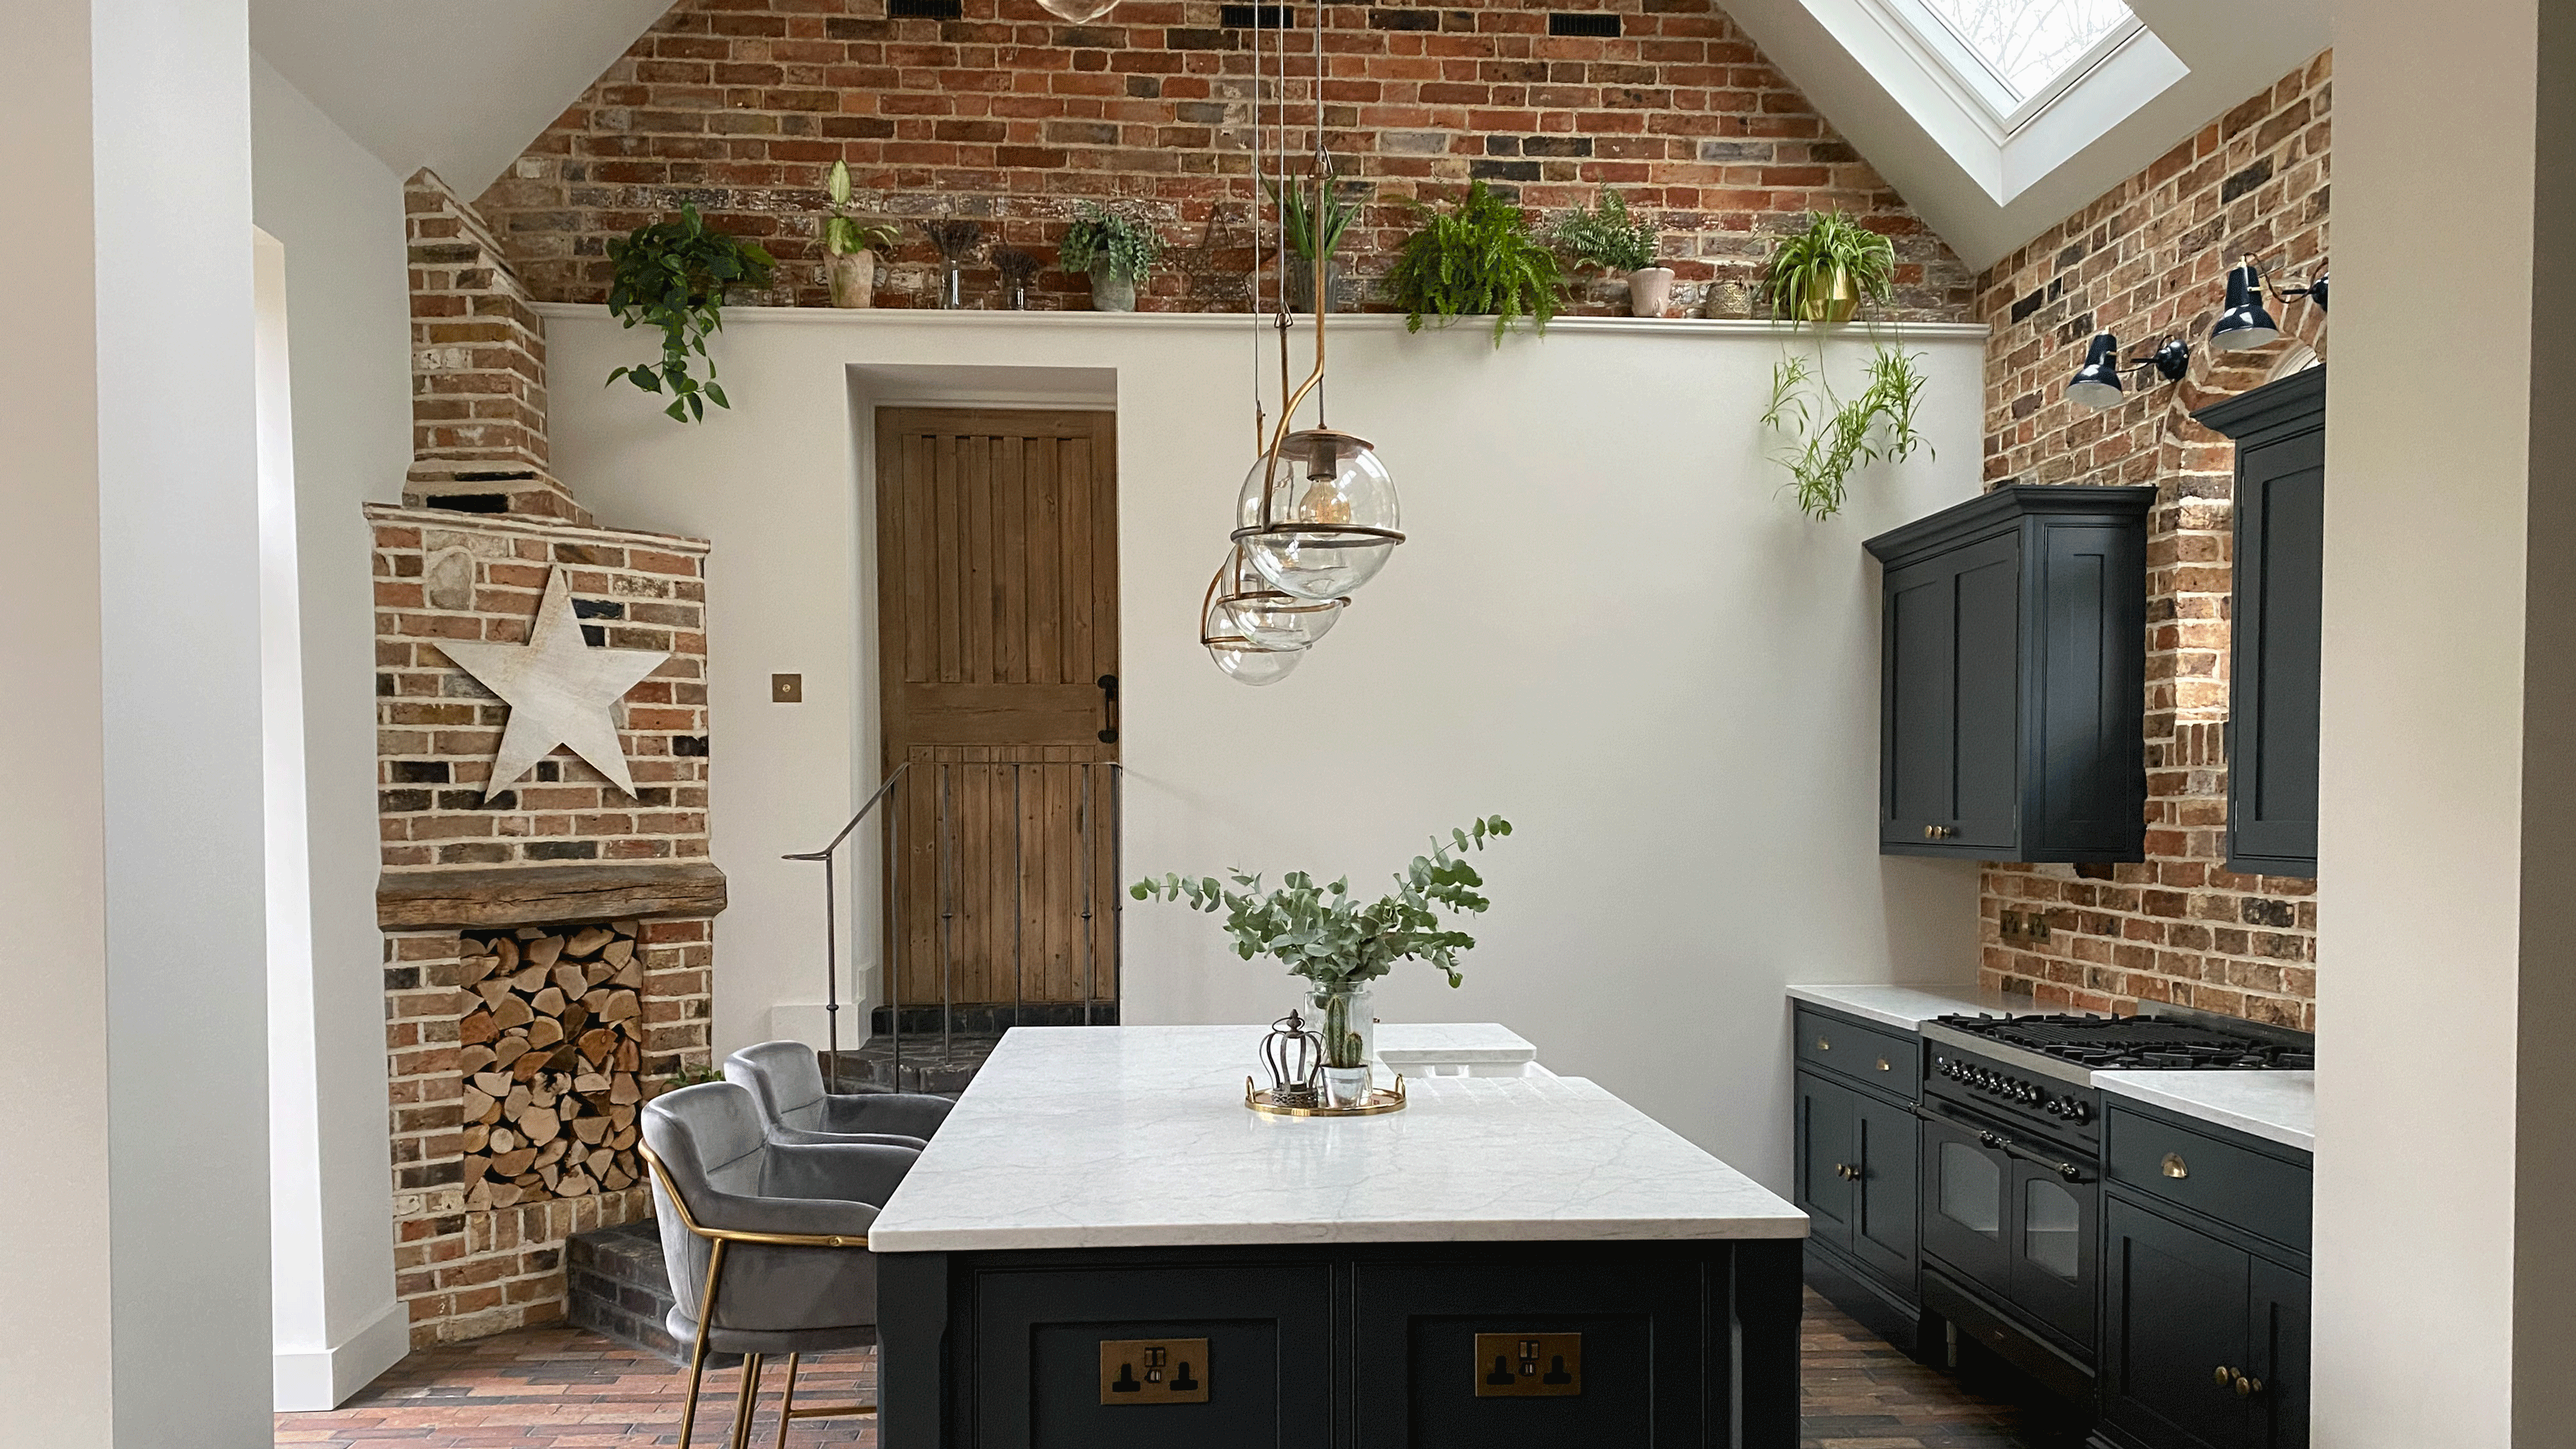 modern farmhouse kitchen with exposed brick